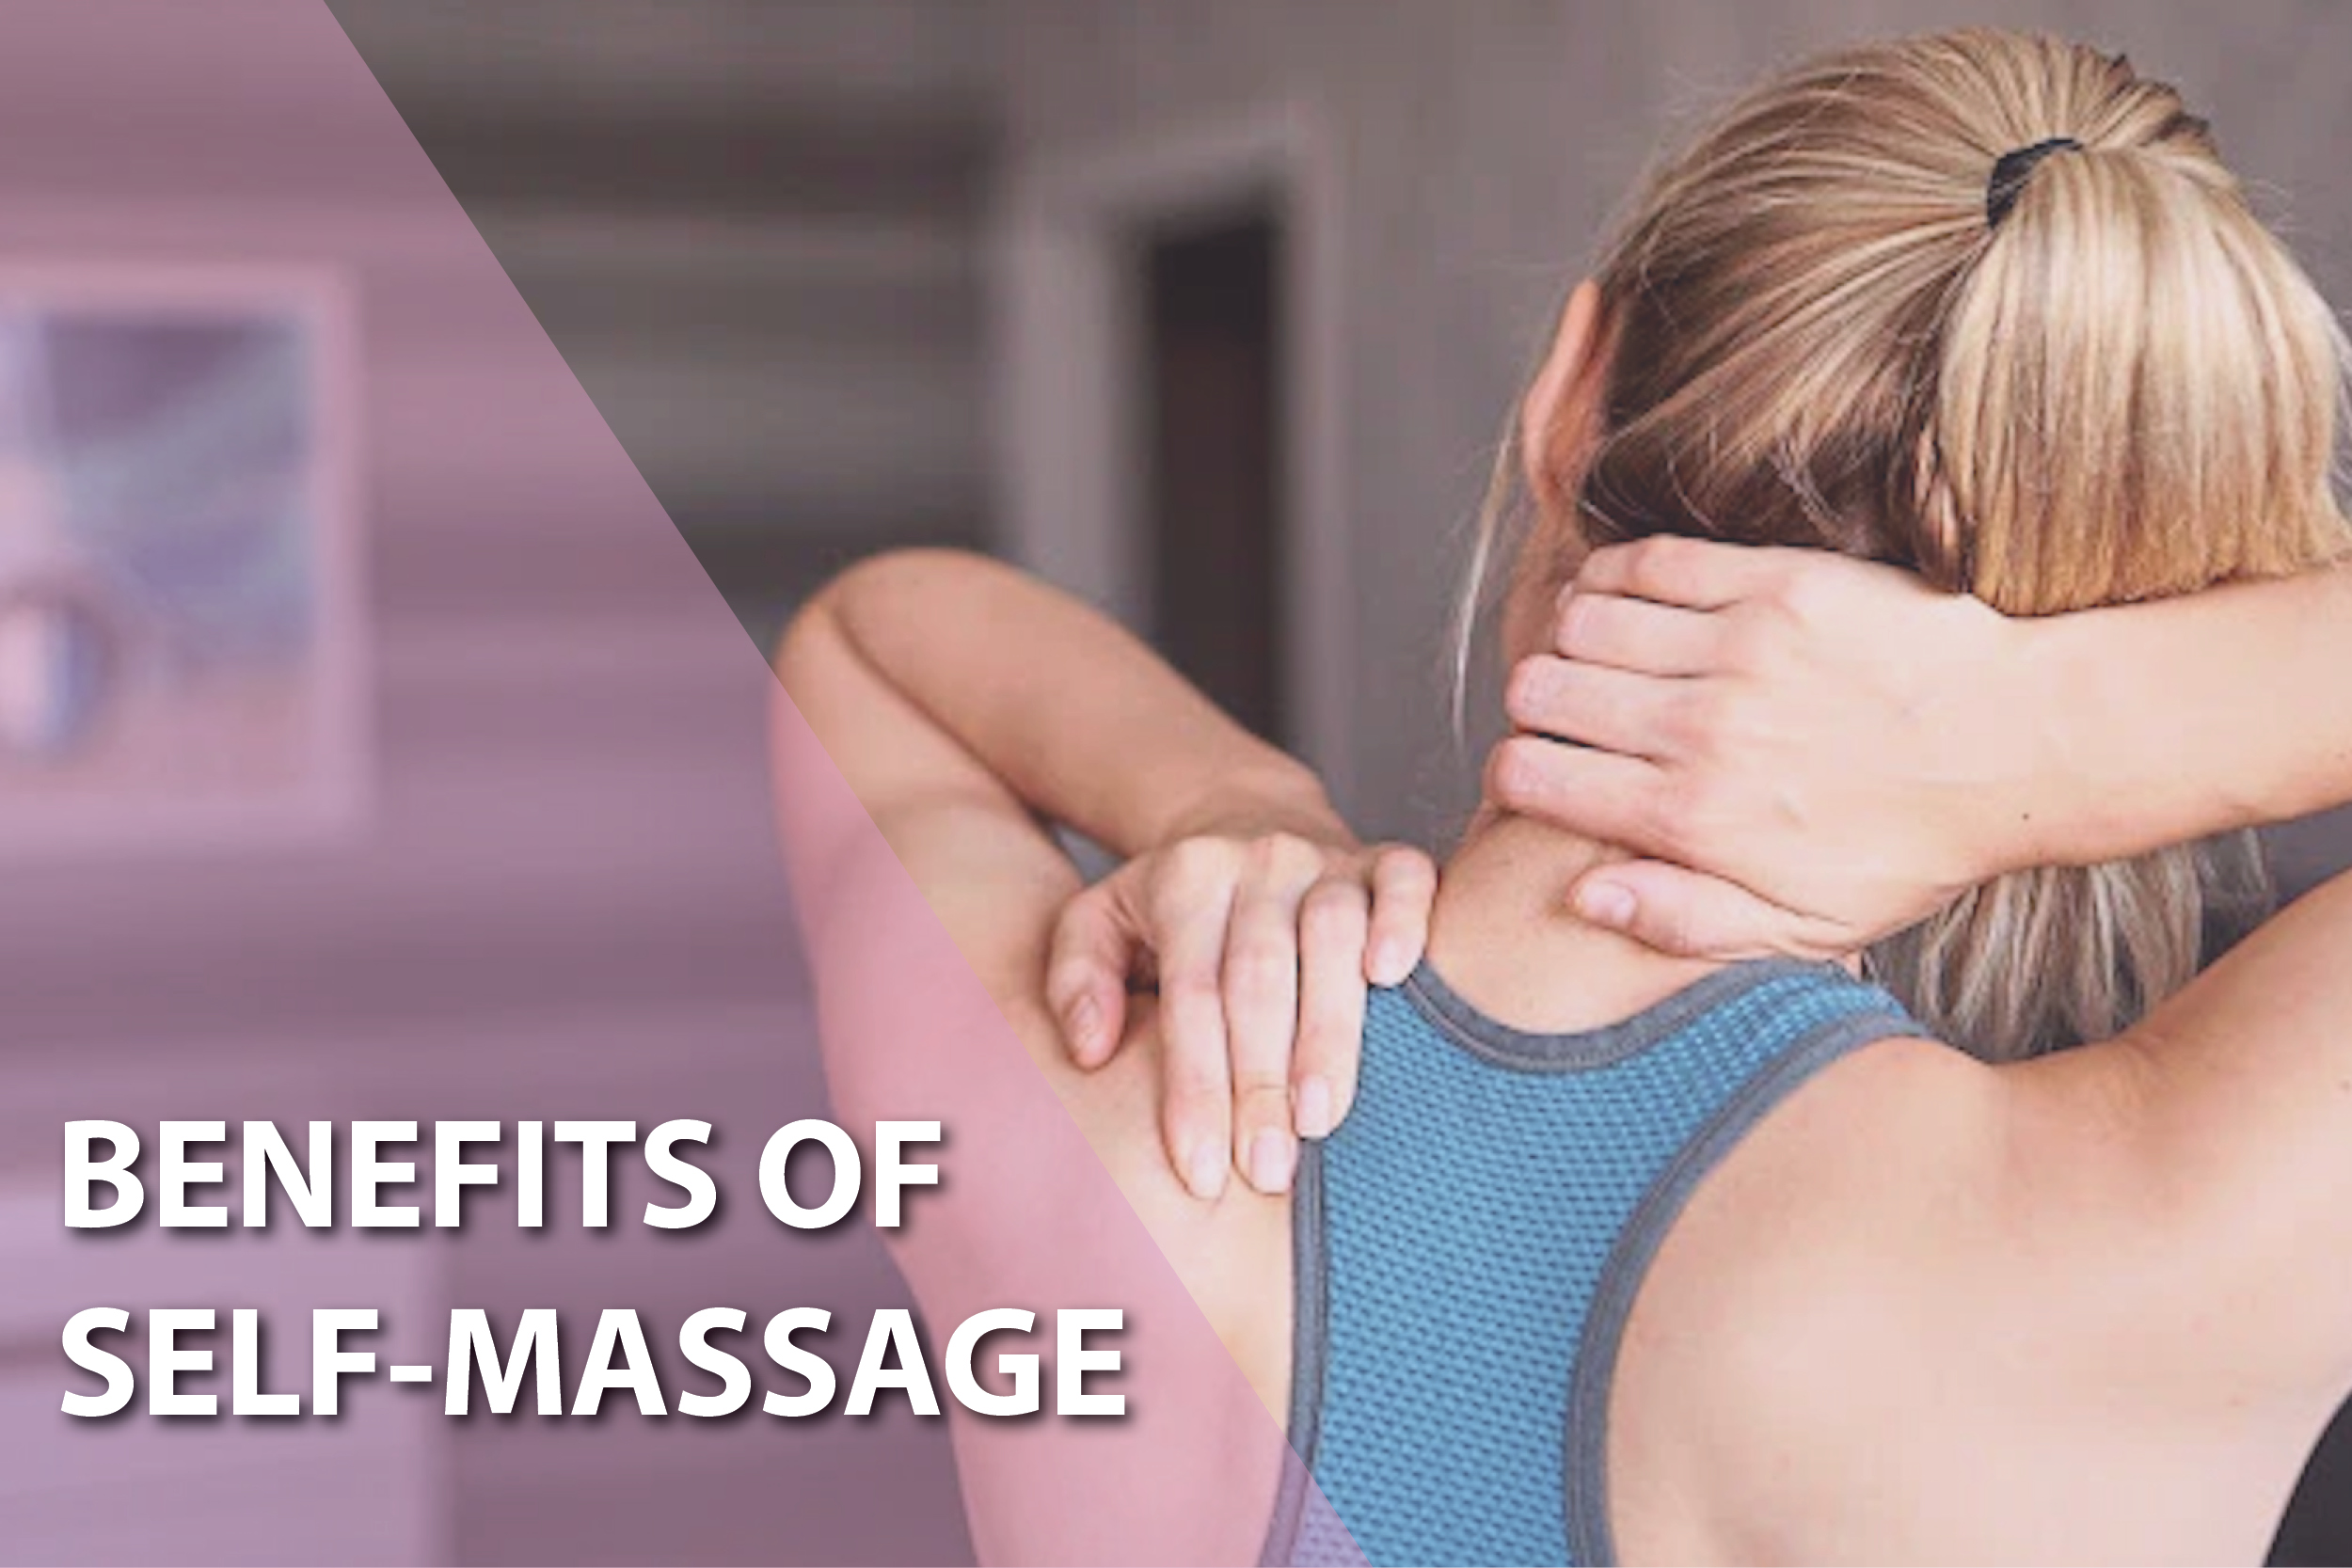 Self-Massage Moves to Improve Joint and Muscle Health